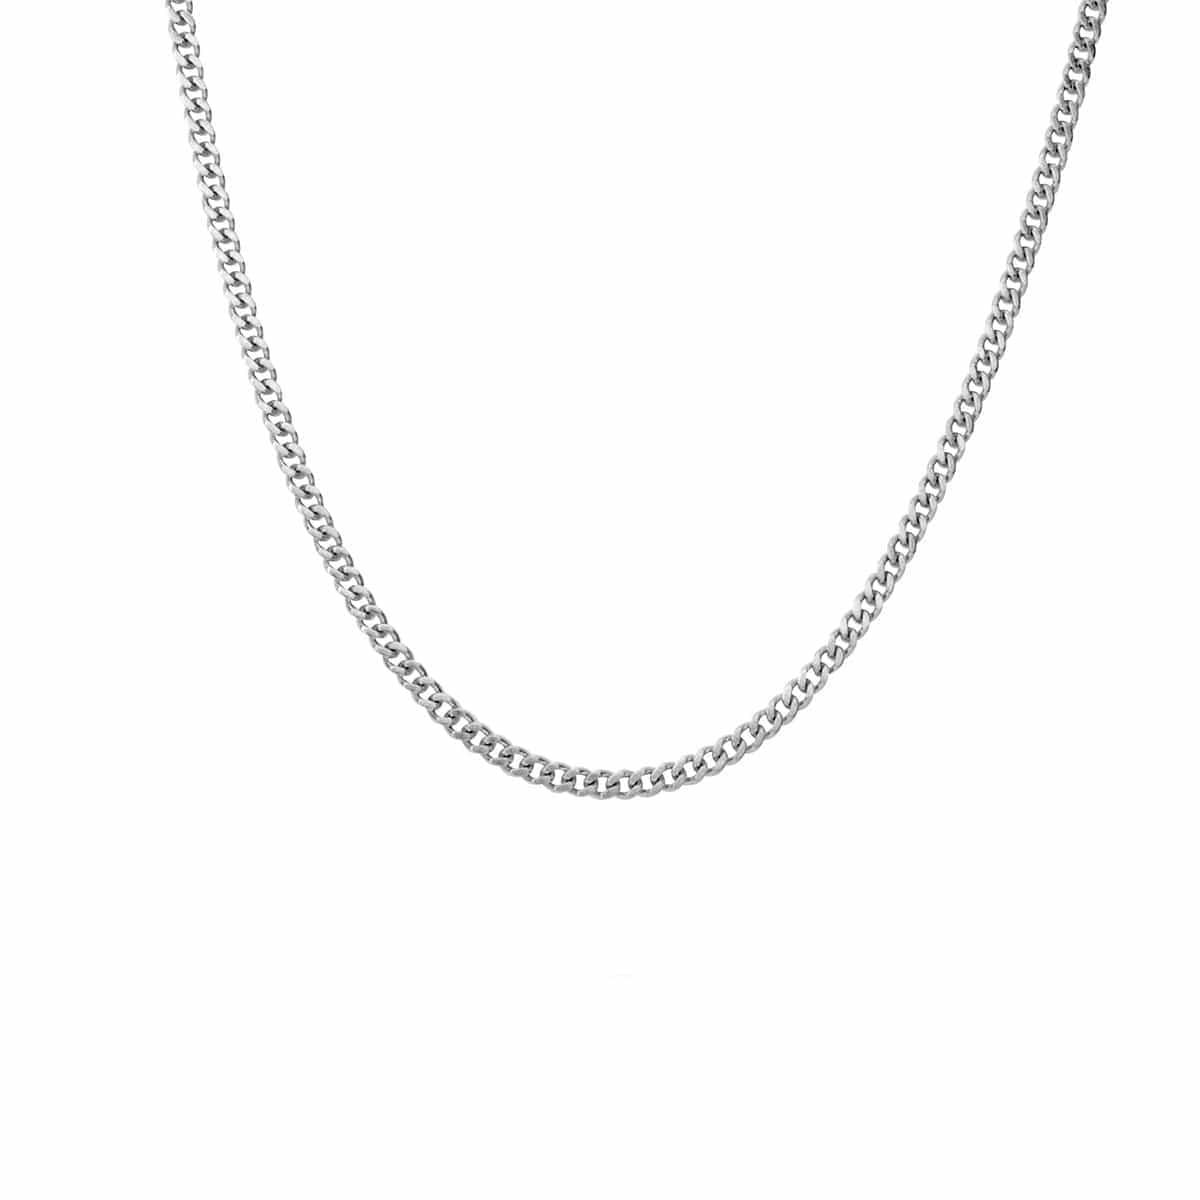 INOX JEWELRY Chains Silver Tone Stainless Steel Polished 2mm Flat Curb Chain